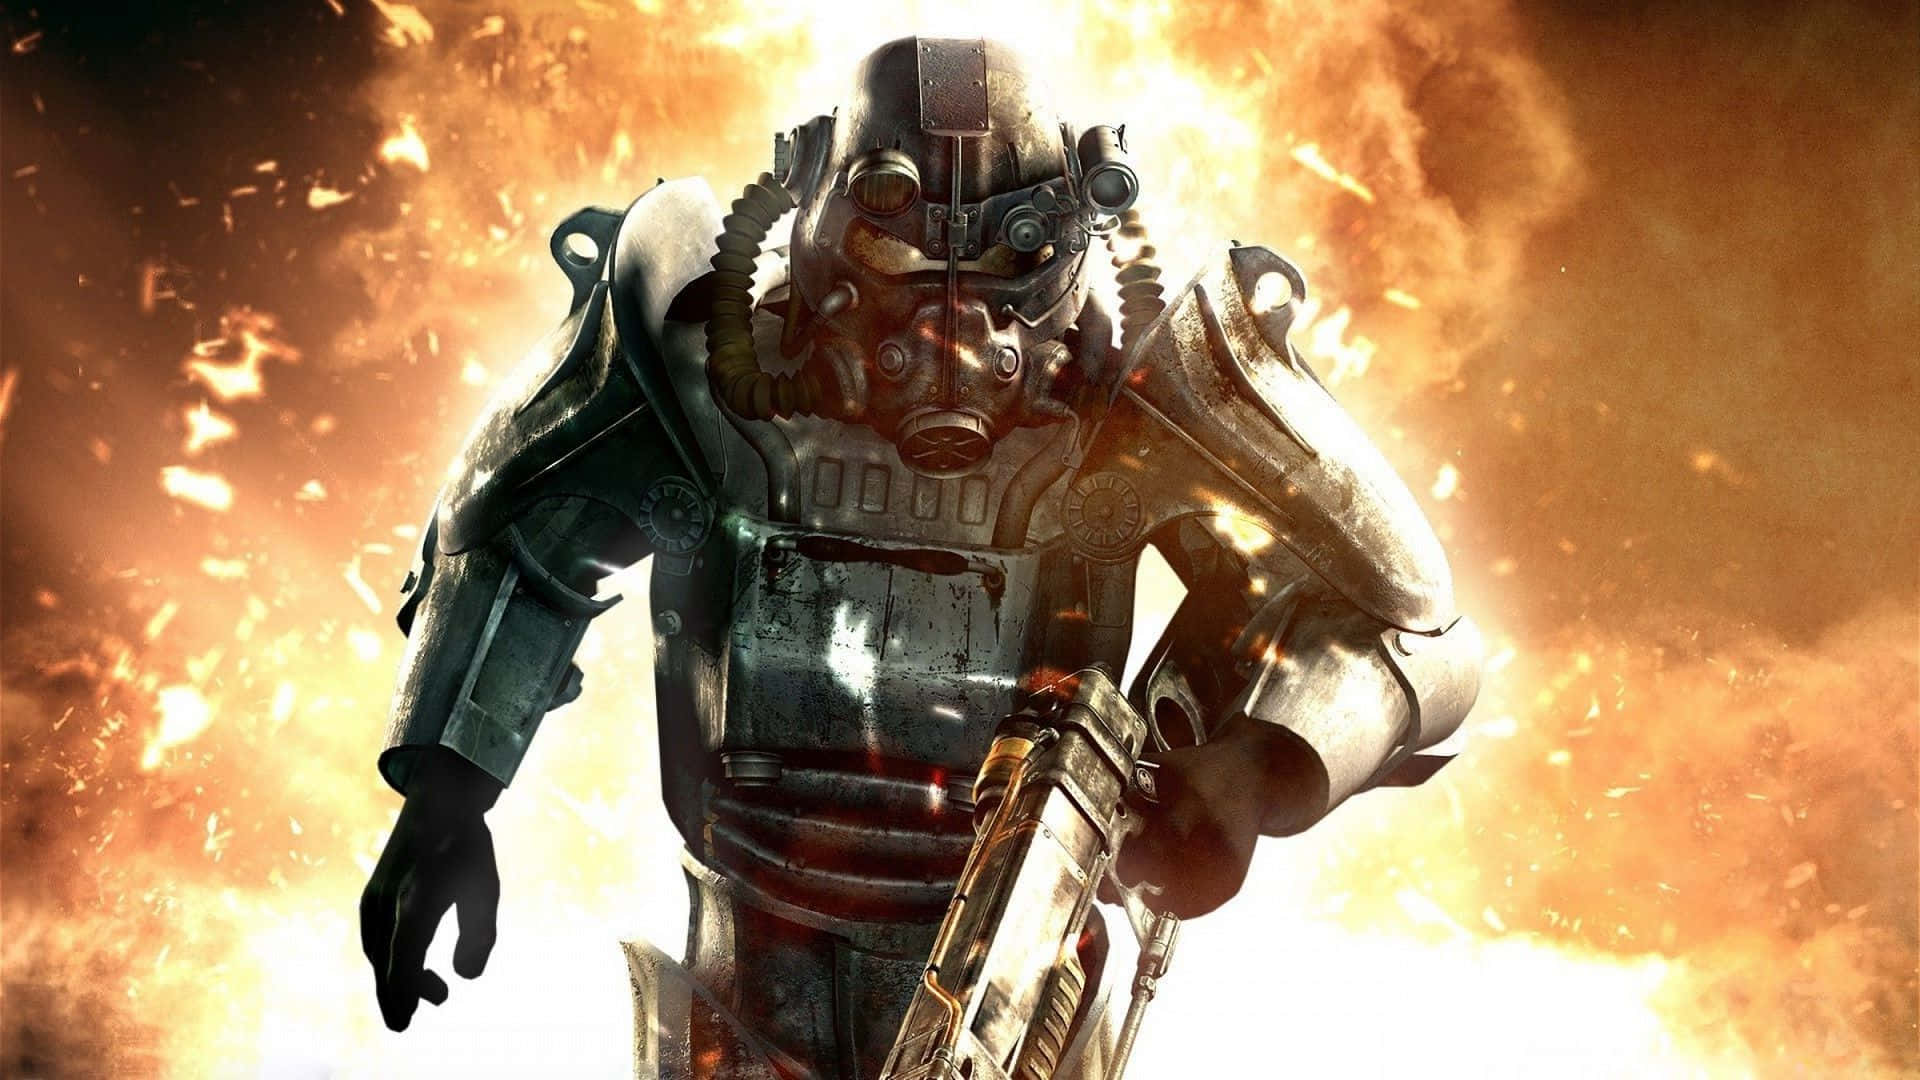 Caption: The Invincible Power Armor from Fallout 4 Wallpaper